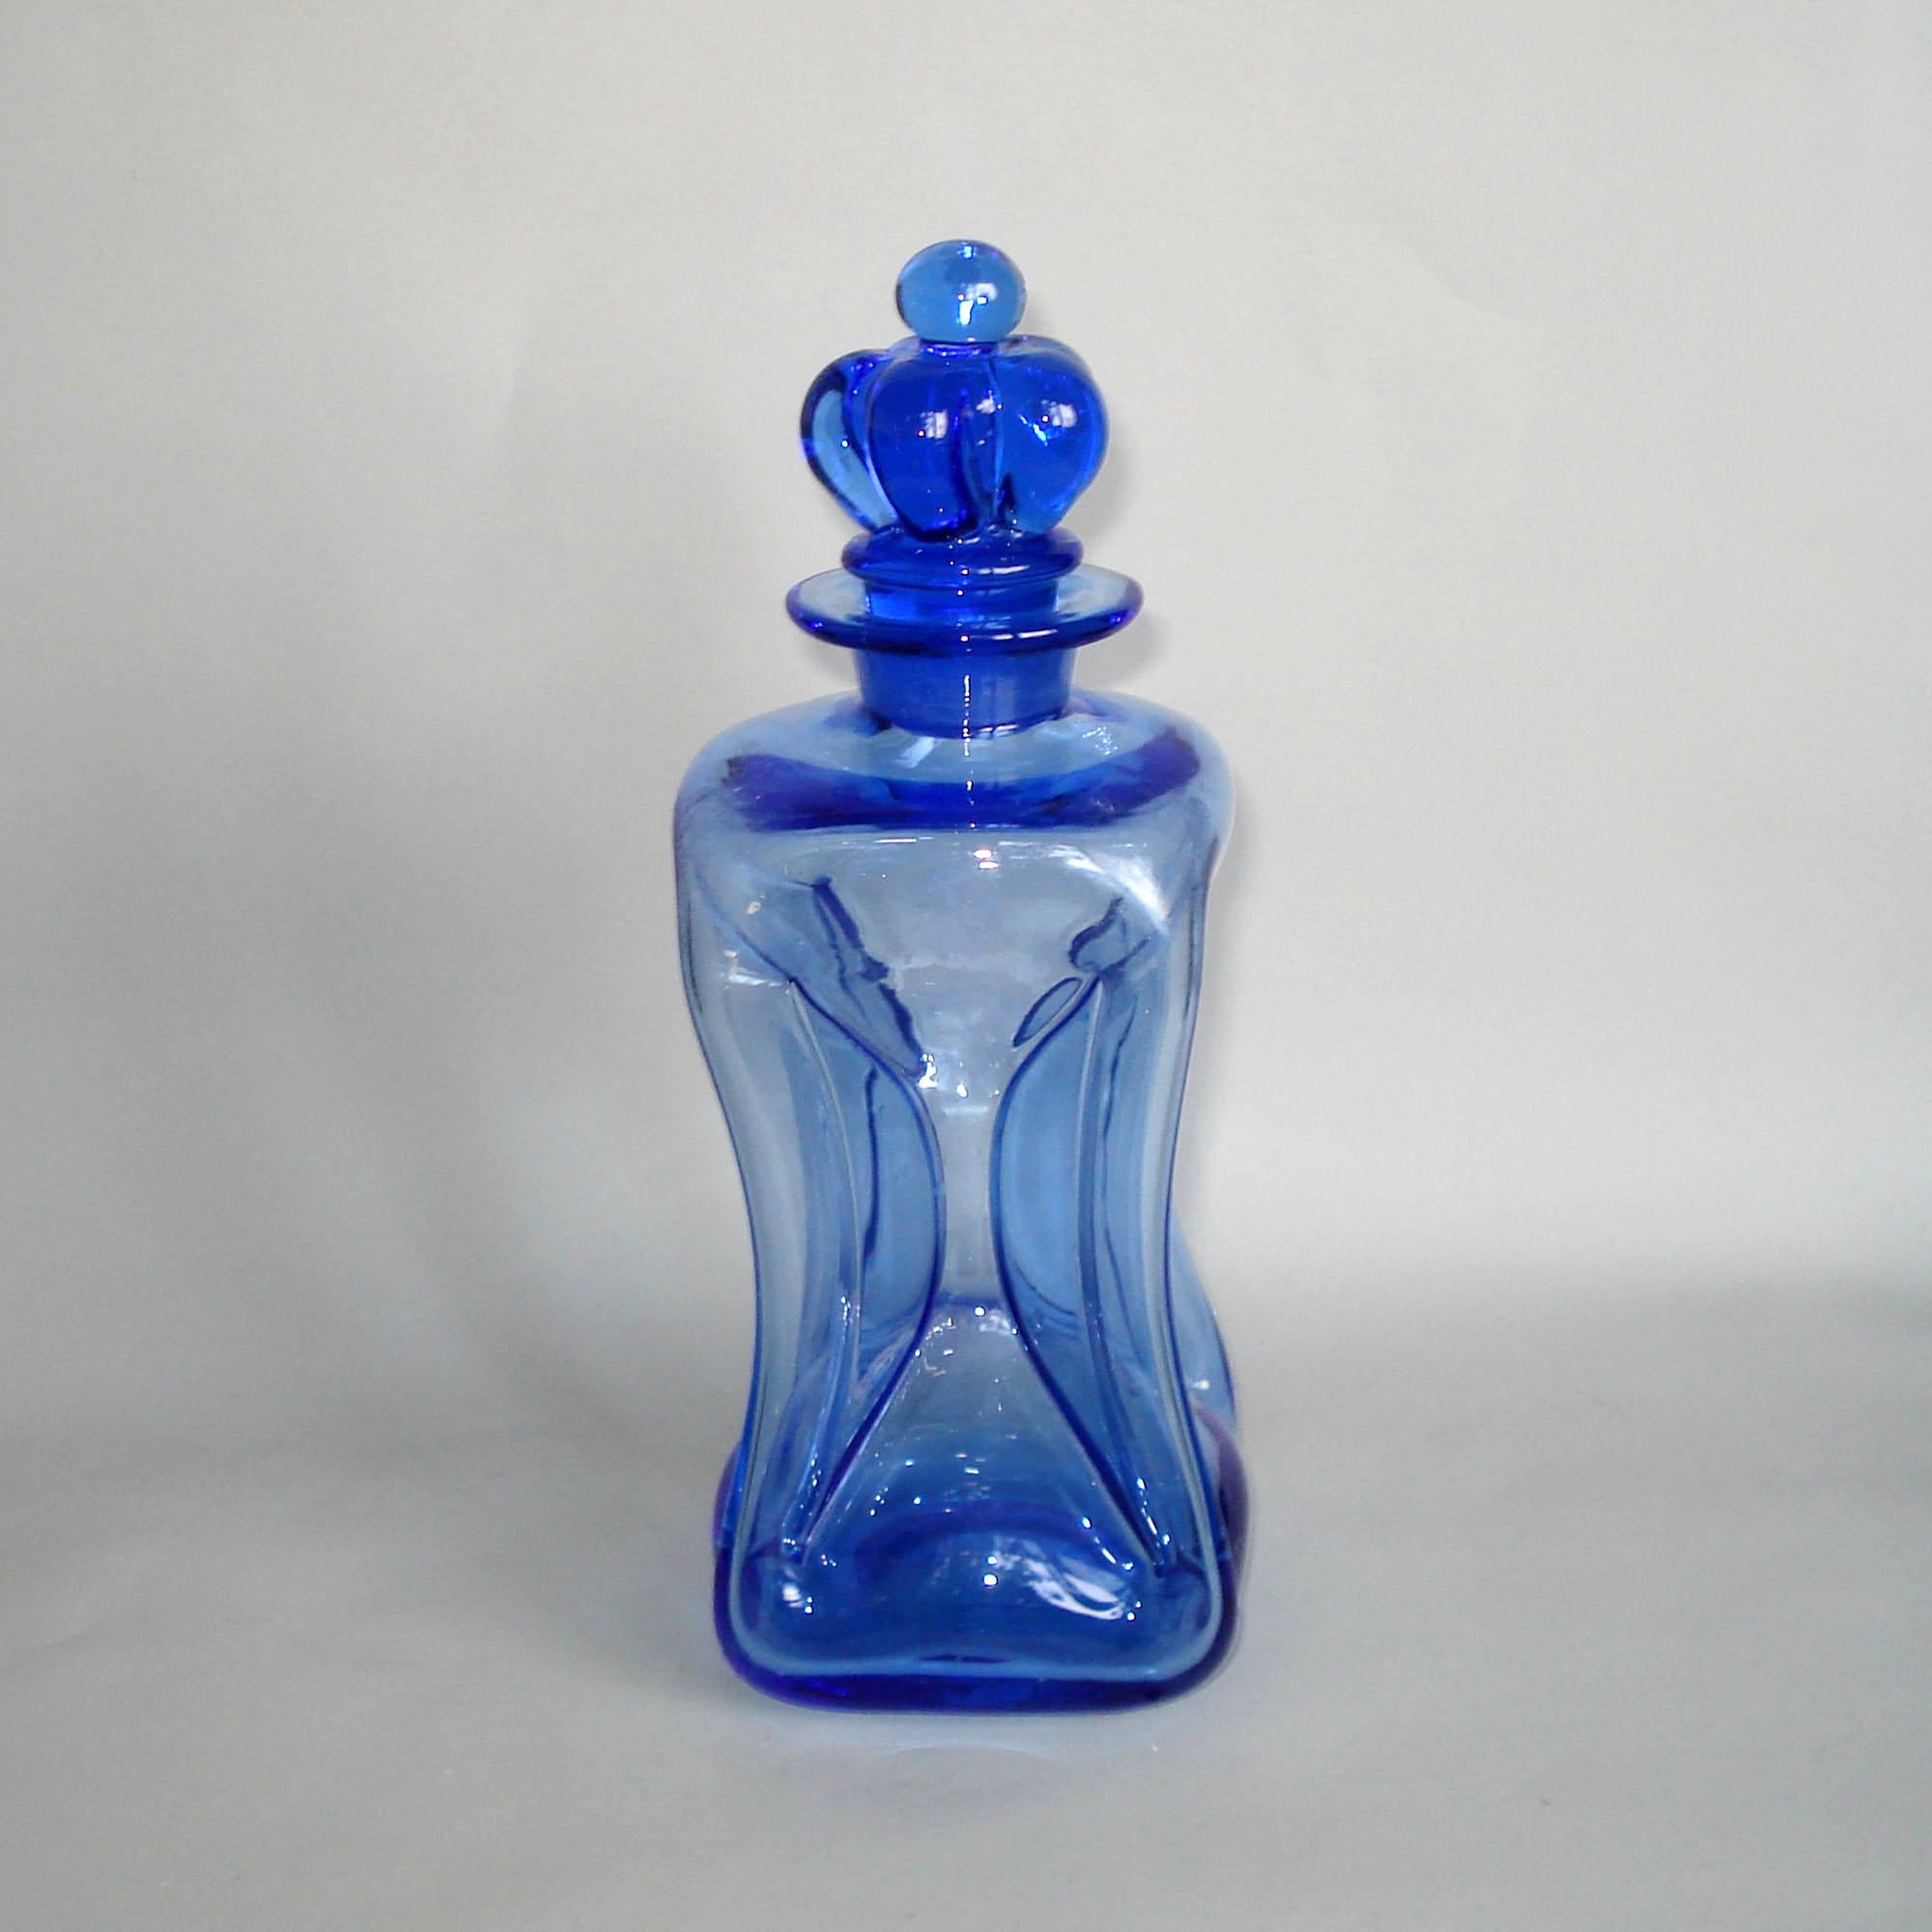 Midcentury Danish glass decanter designed by Jacob E. Bang for Holmegaard

A fine 1950s Danish royal blue decanter with crown stopper, designed by Jacob E. Bang for Holmegaard. Made of hand blown glass, with pinched side sections to create the